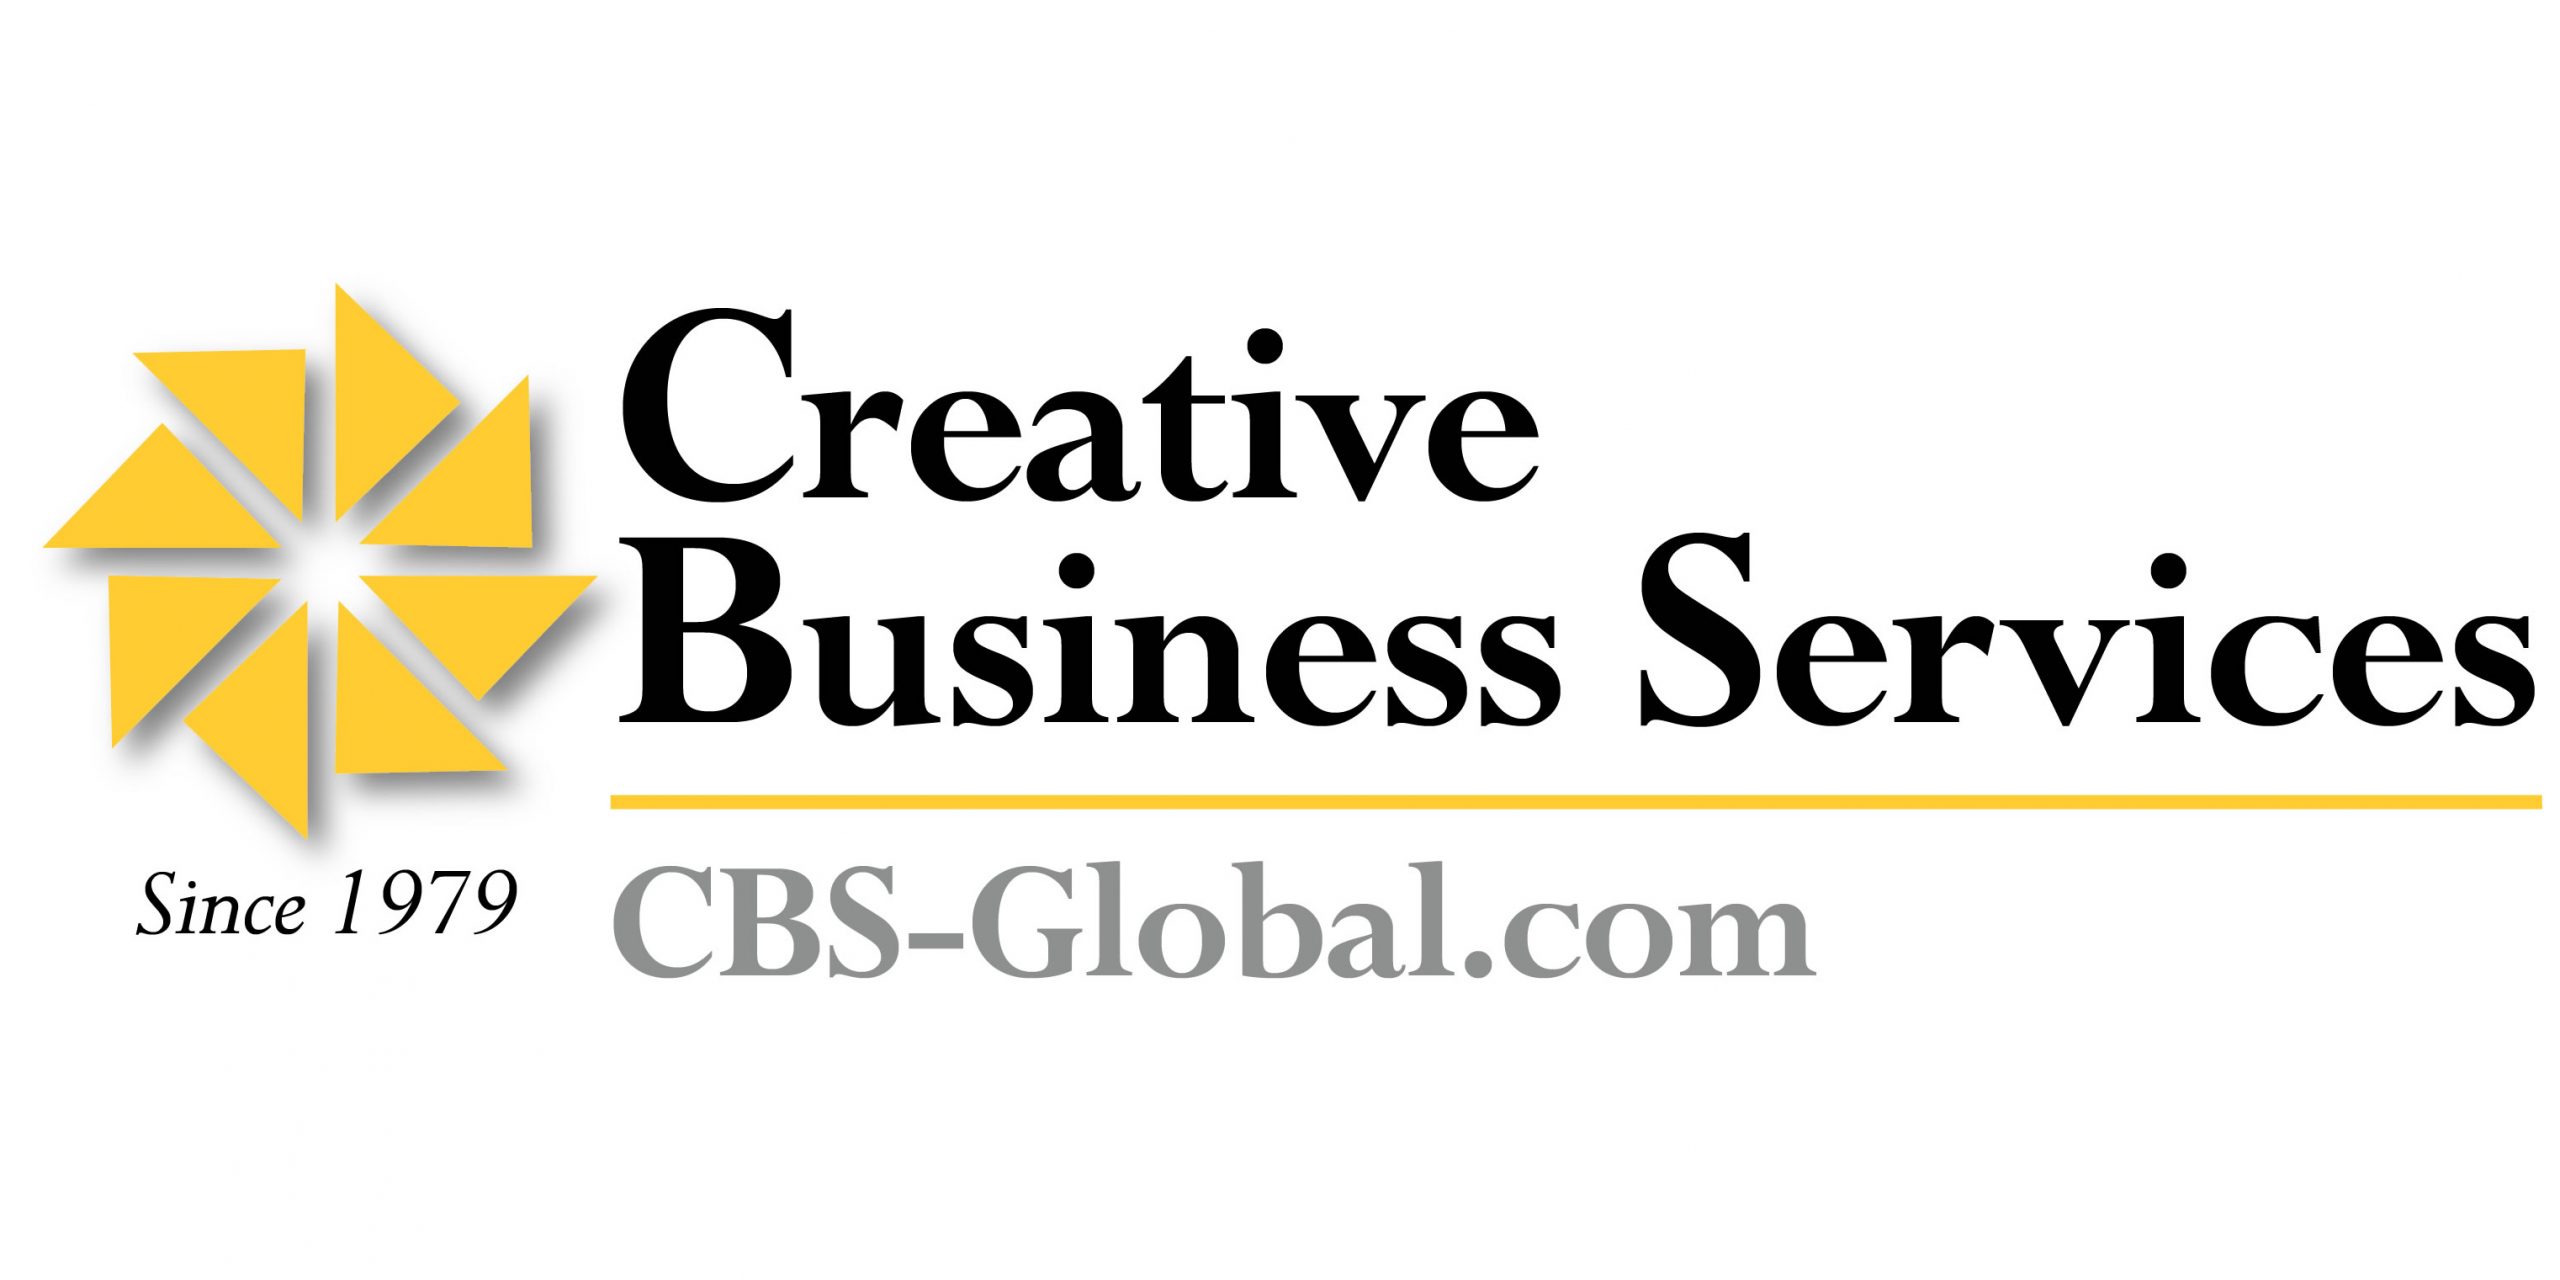 Creative Business Services